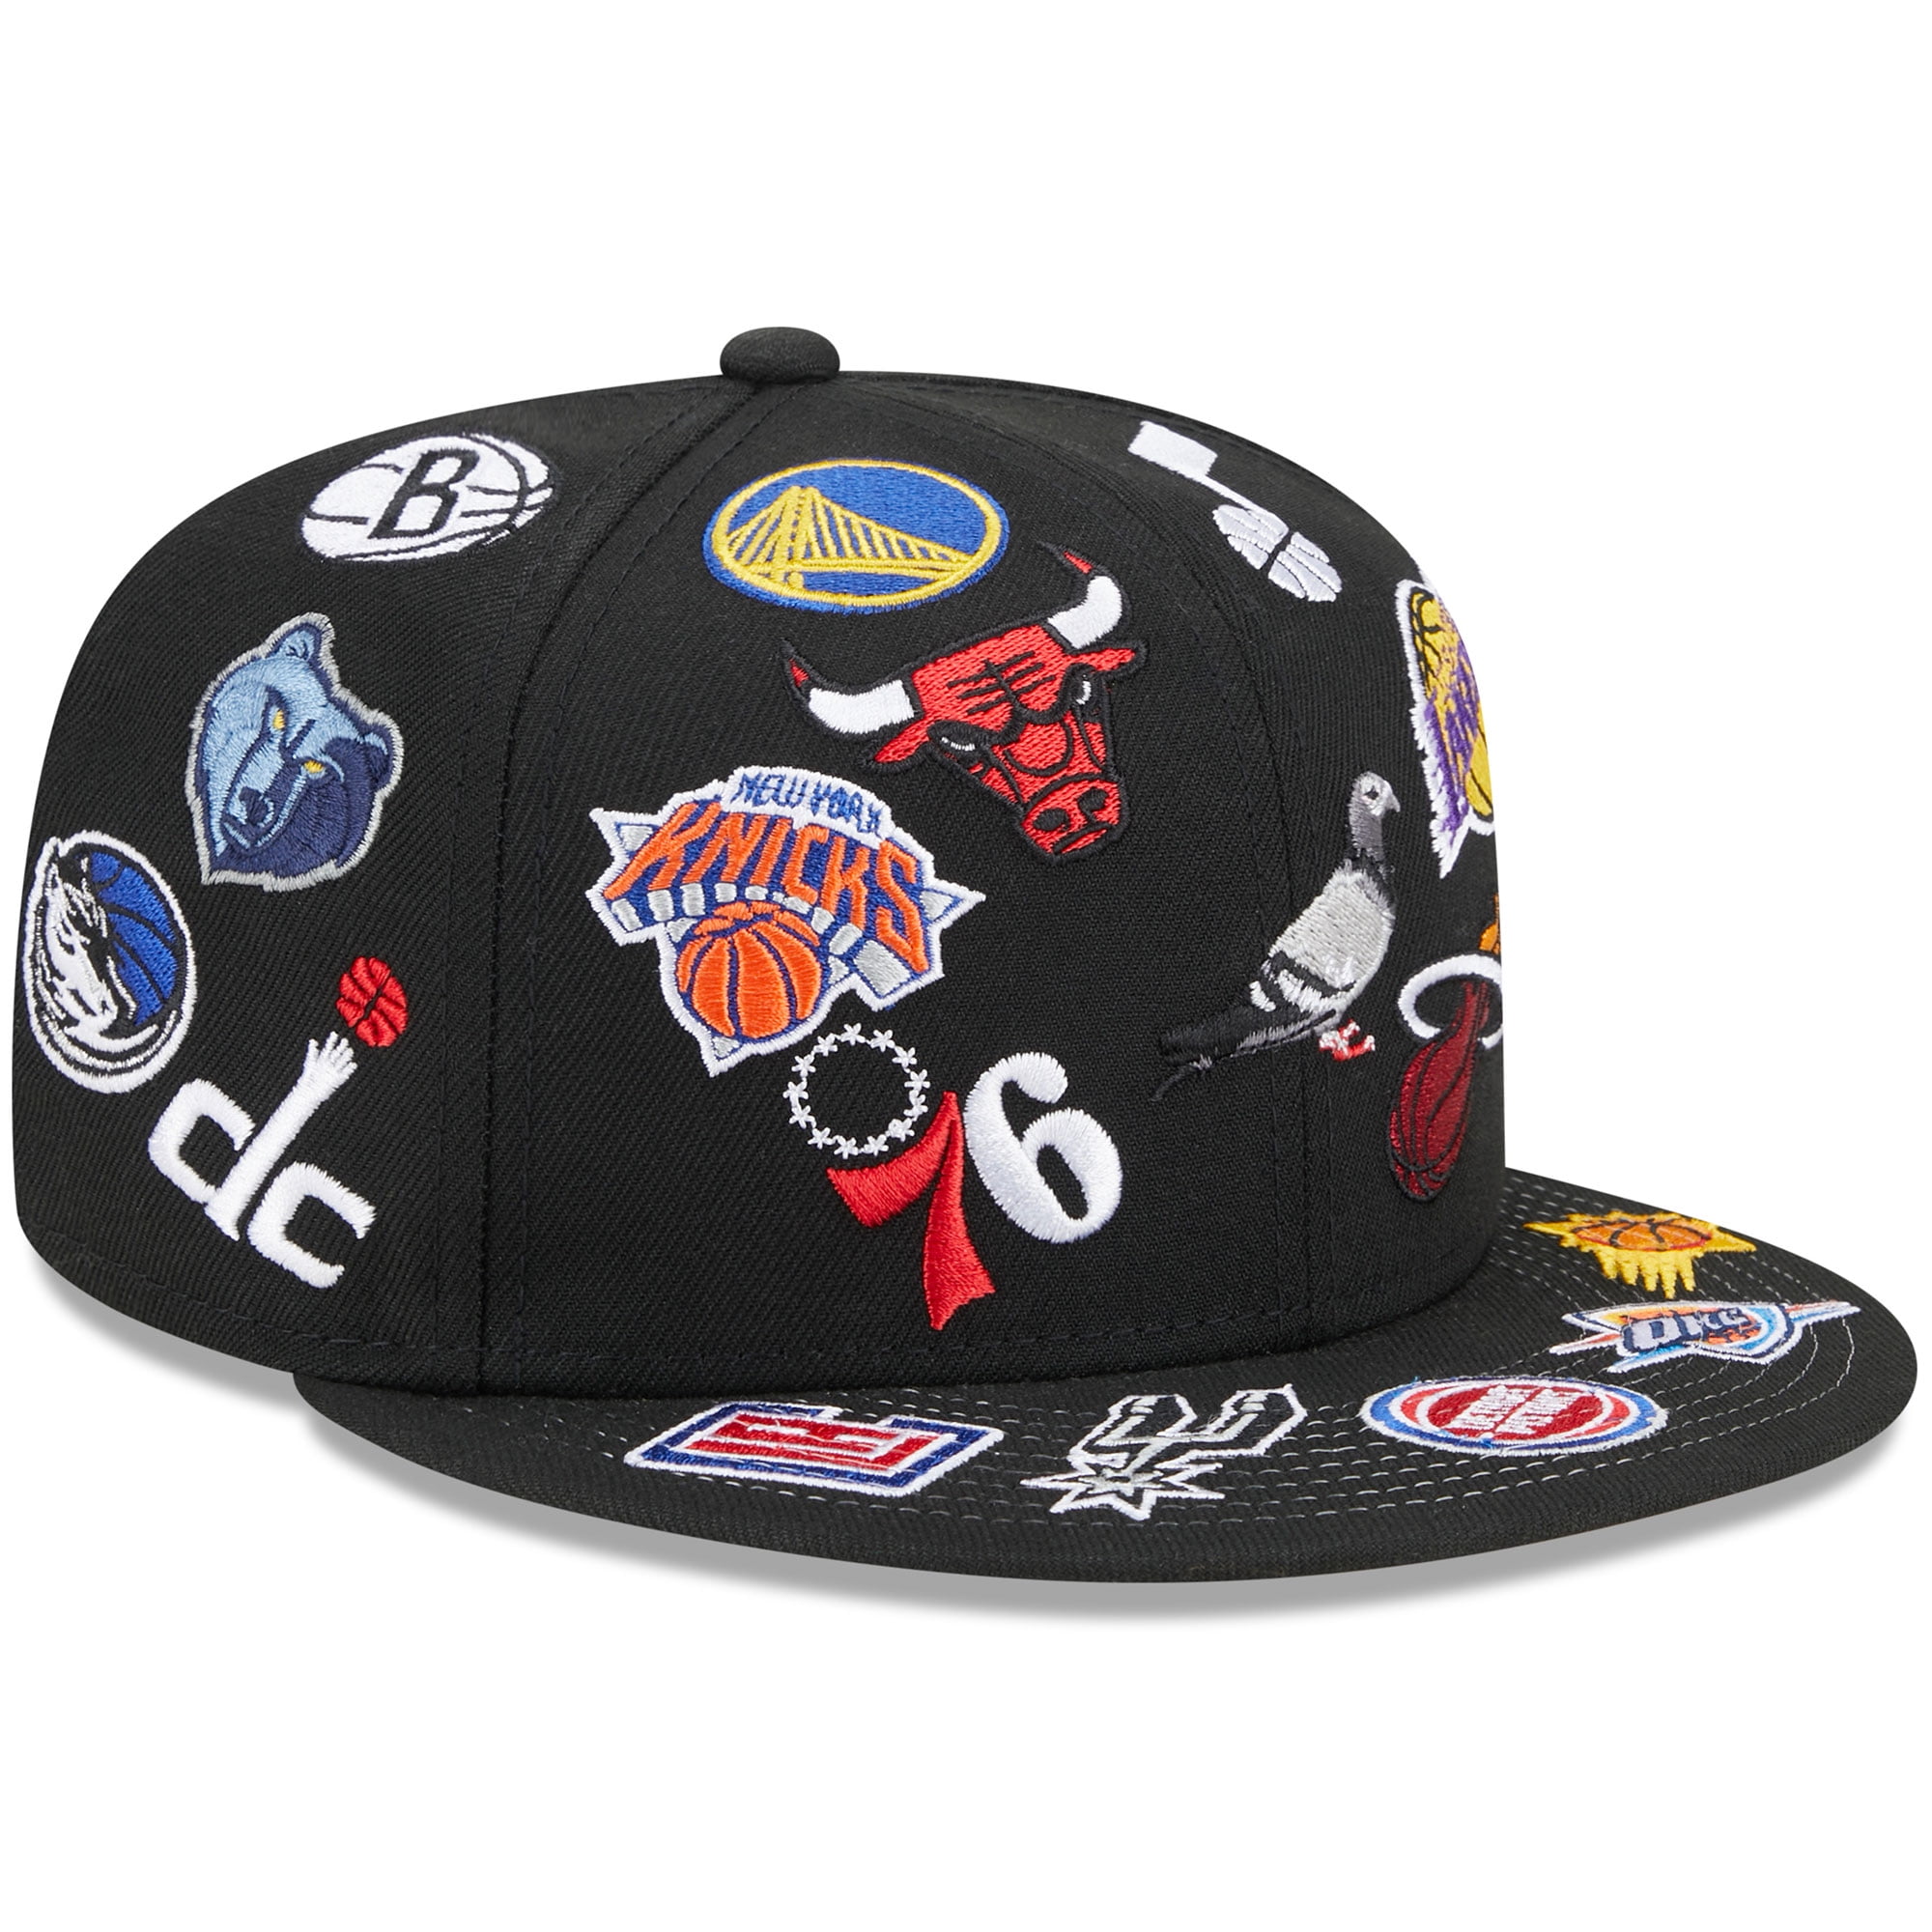 Men's New Era Black NBA x Staple 59FIFTY Fitted Hat 